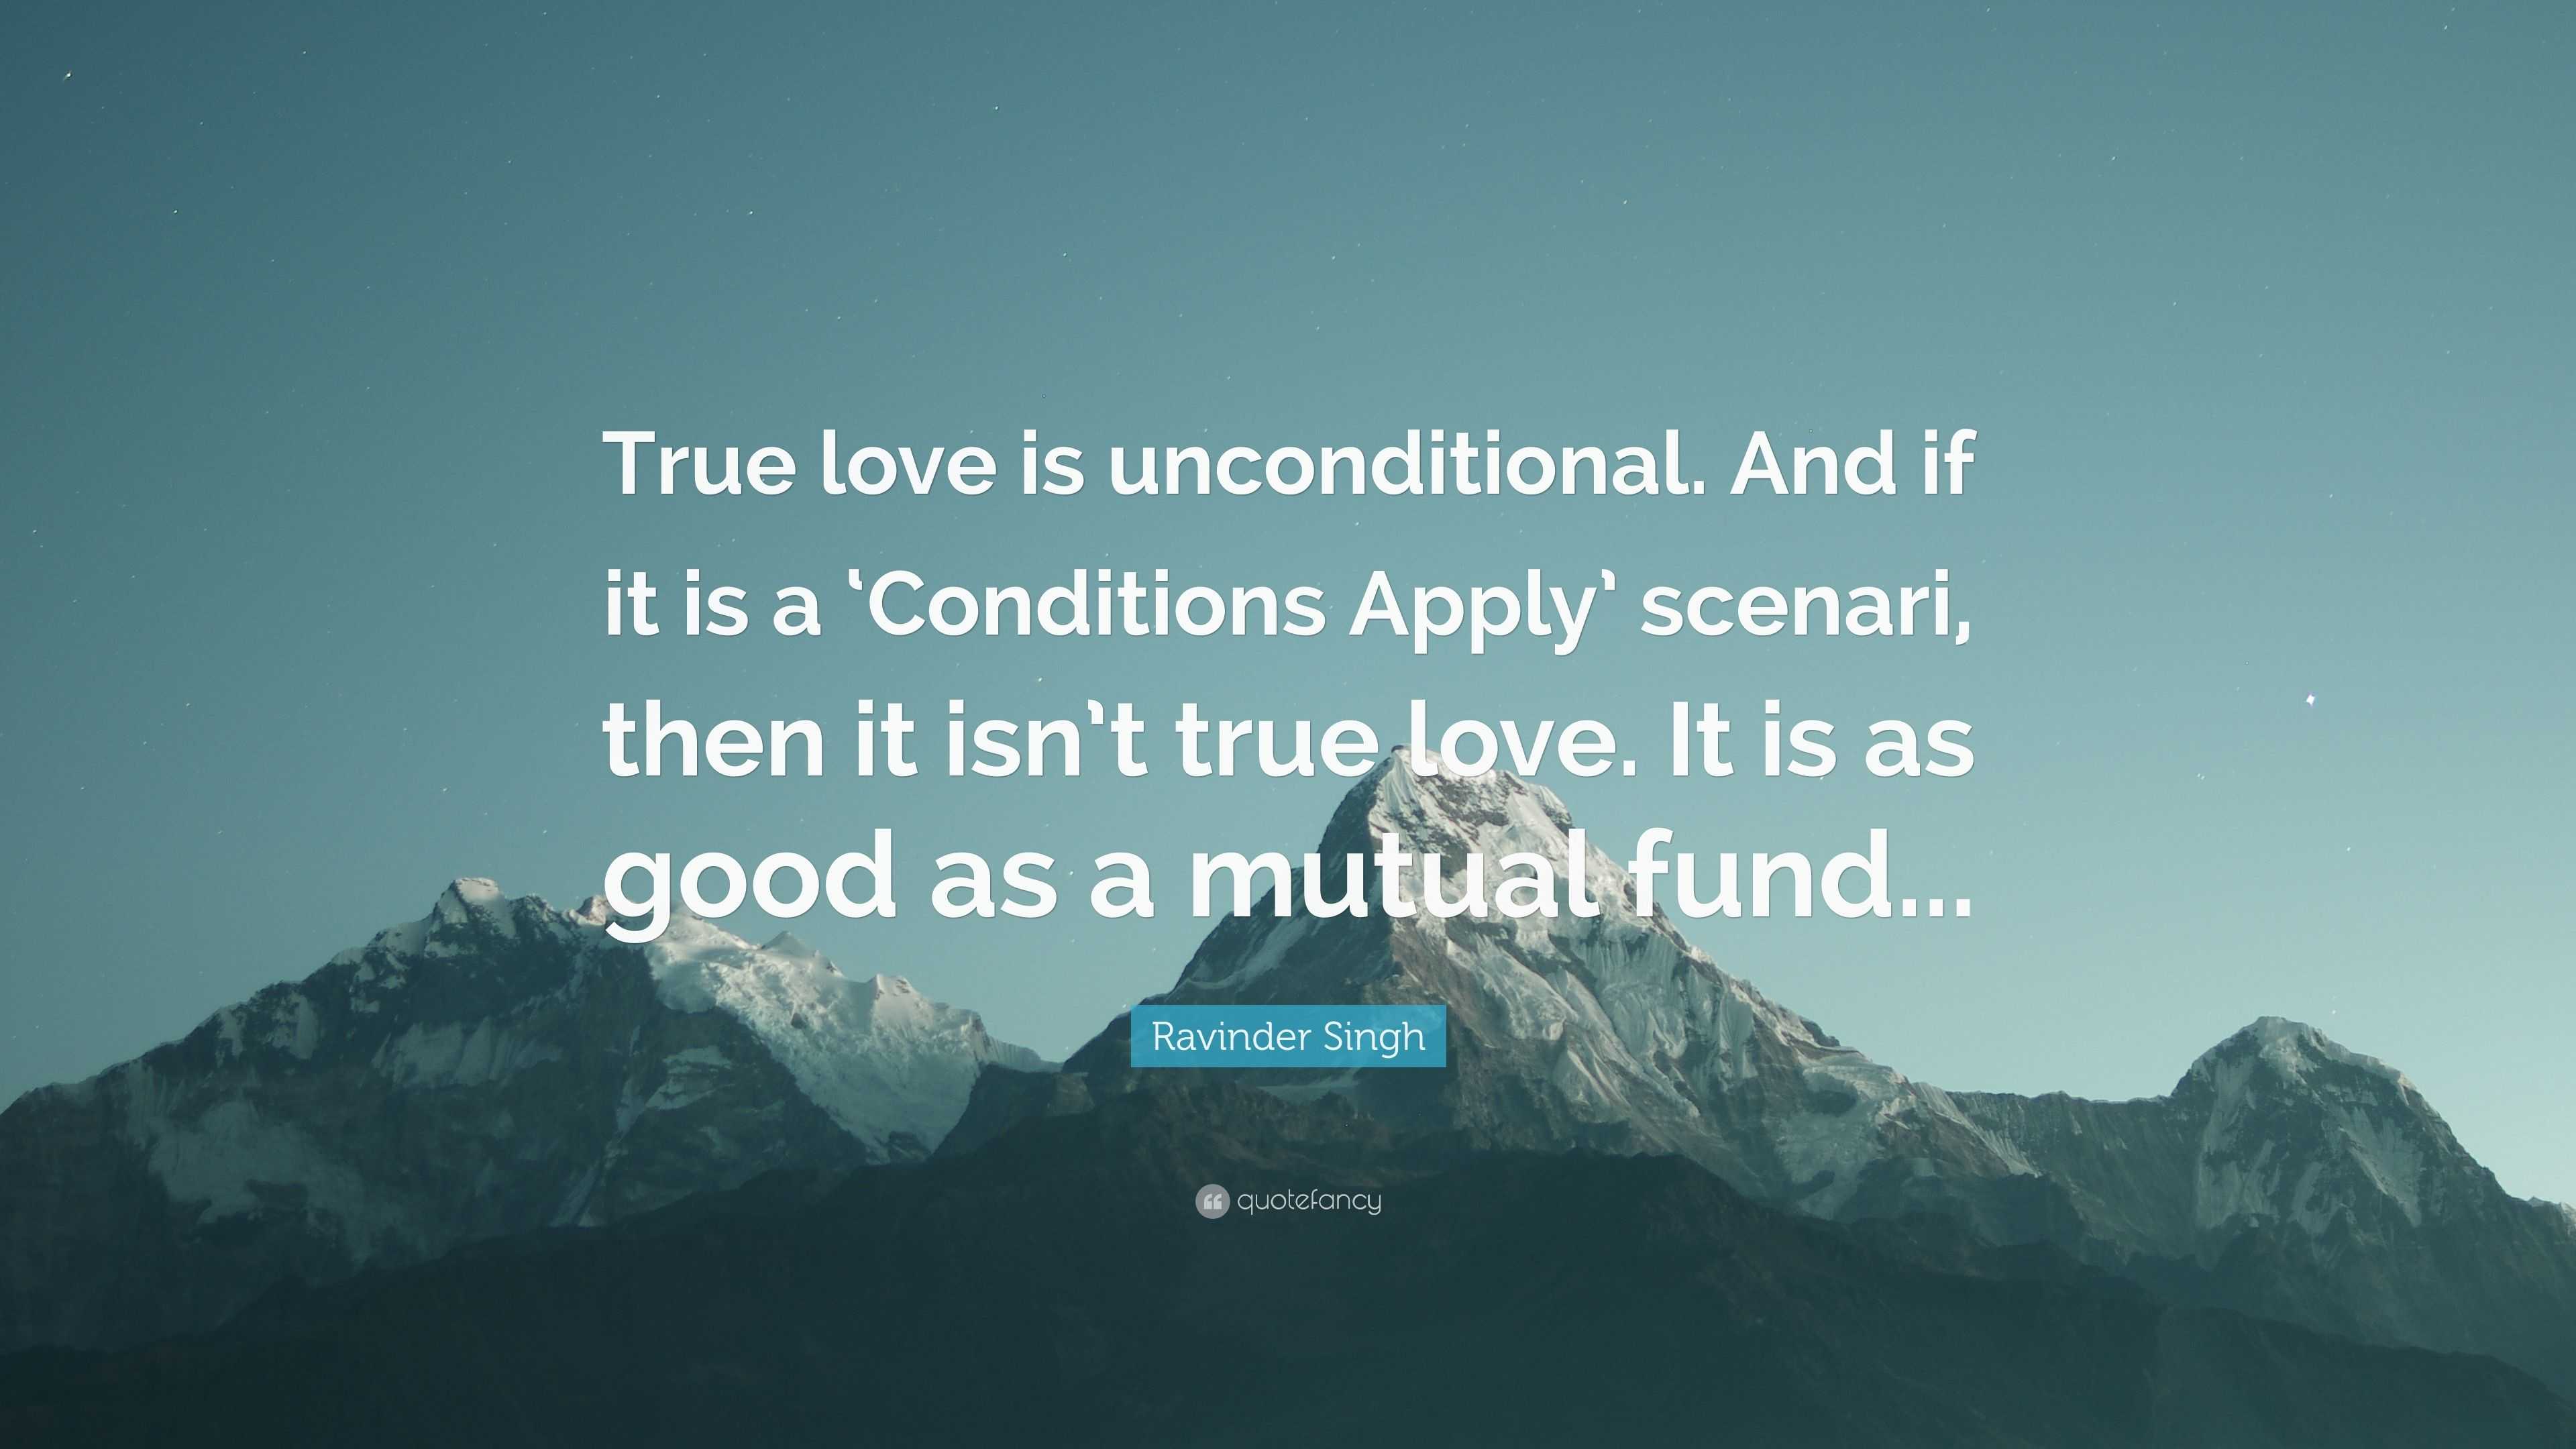 Ravinder Singh Quote “True love is unconditional And if it is a